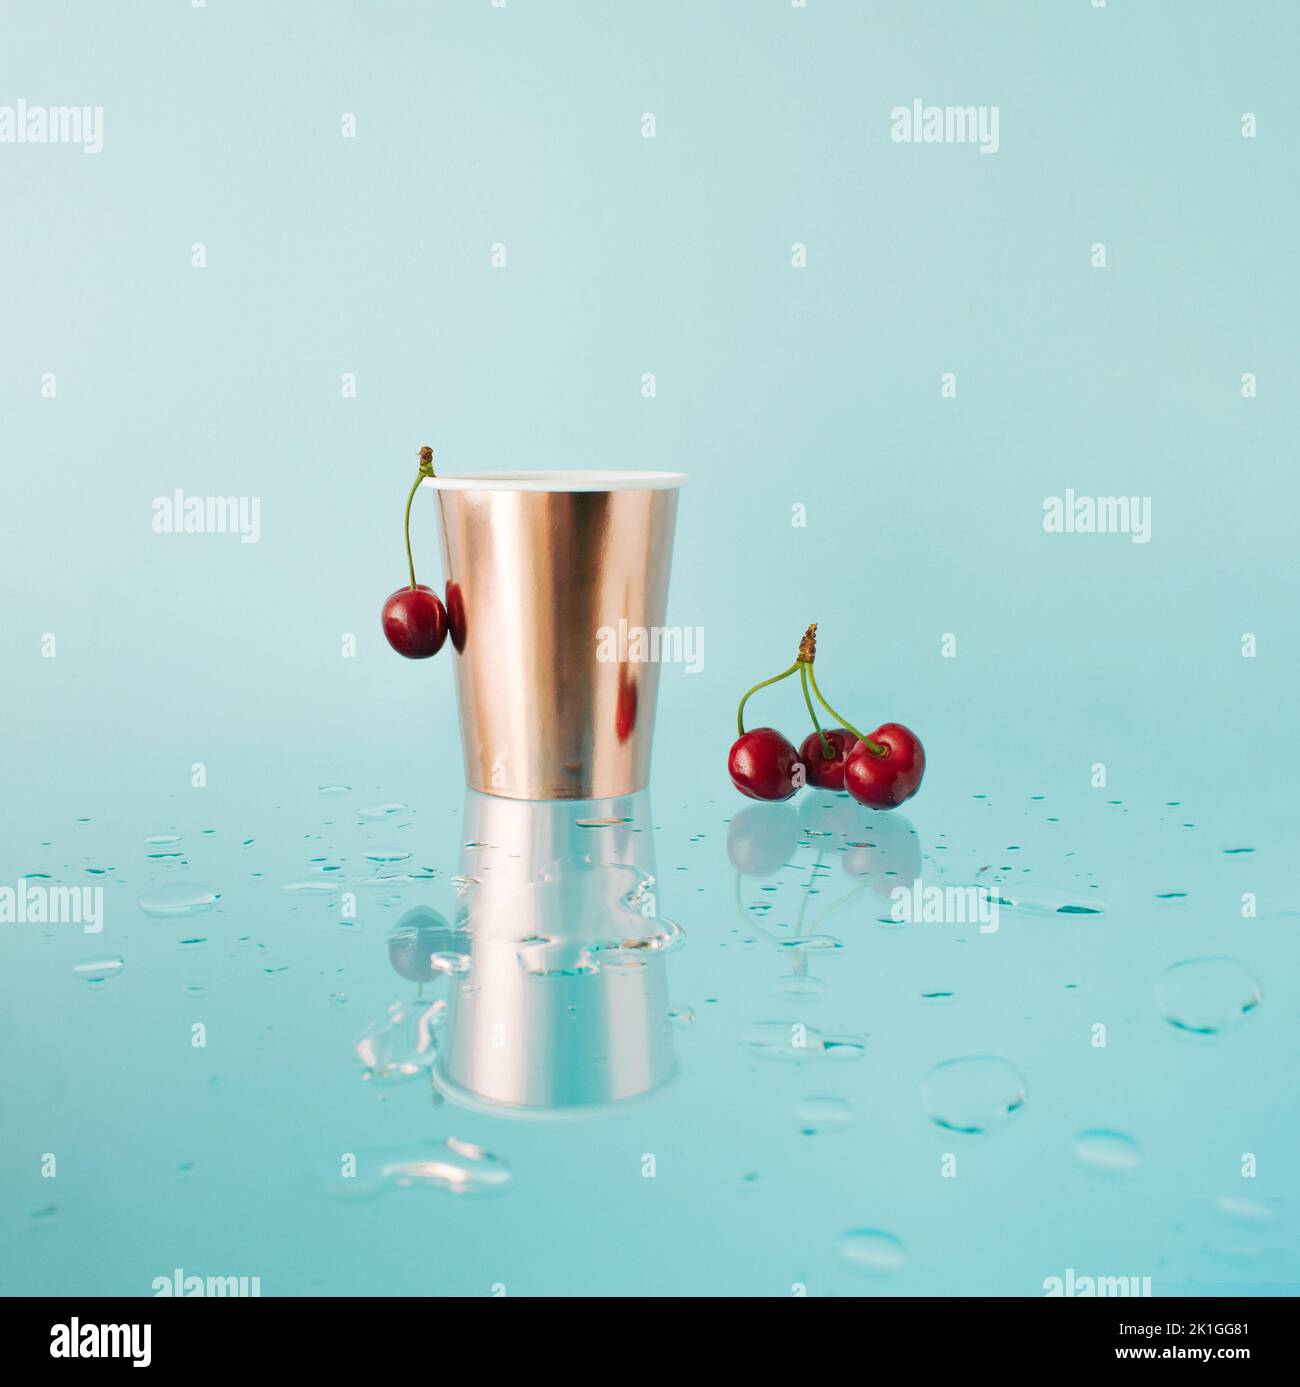 Golden paper cup with fresh cherries on blue reflecting background. Mirror reflection with drops of water. Stock Photo